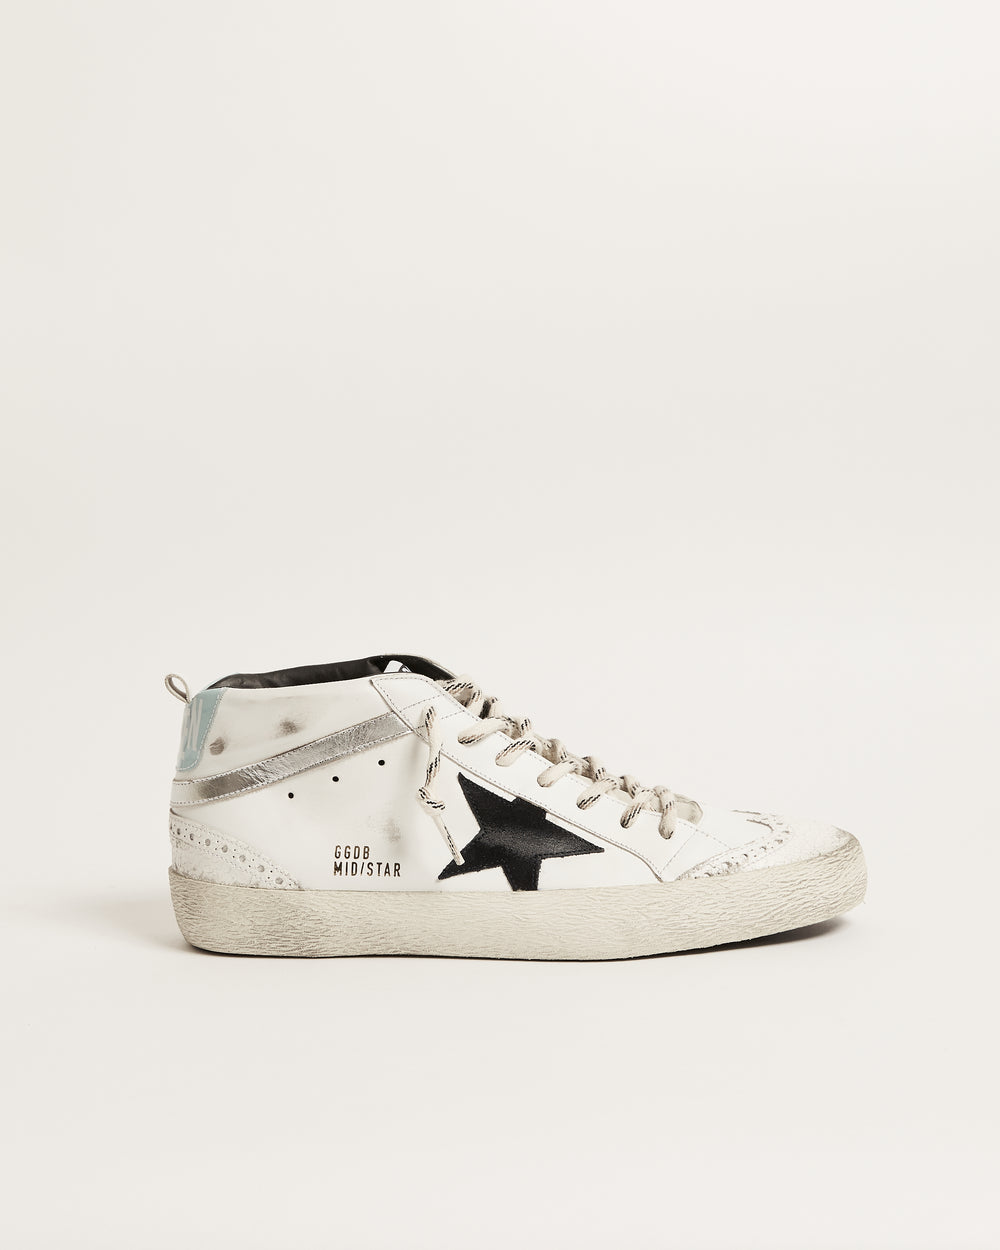 Mid Star in Cracked Leather Toe w/ Suede Black Star and Patent Blue Heel